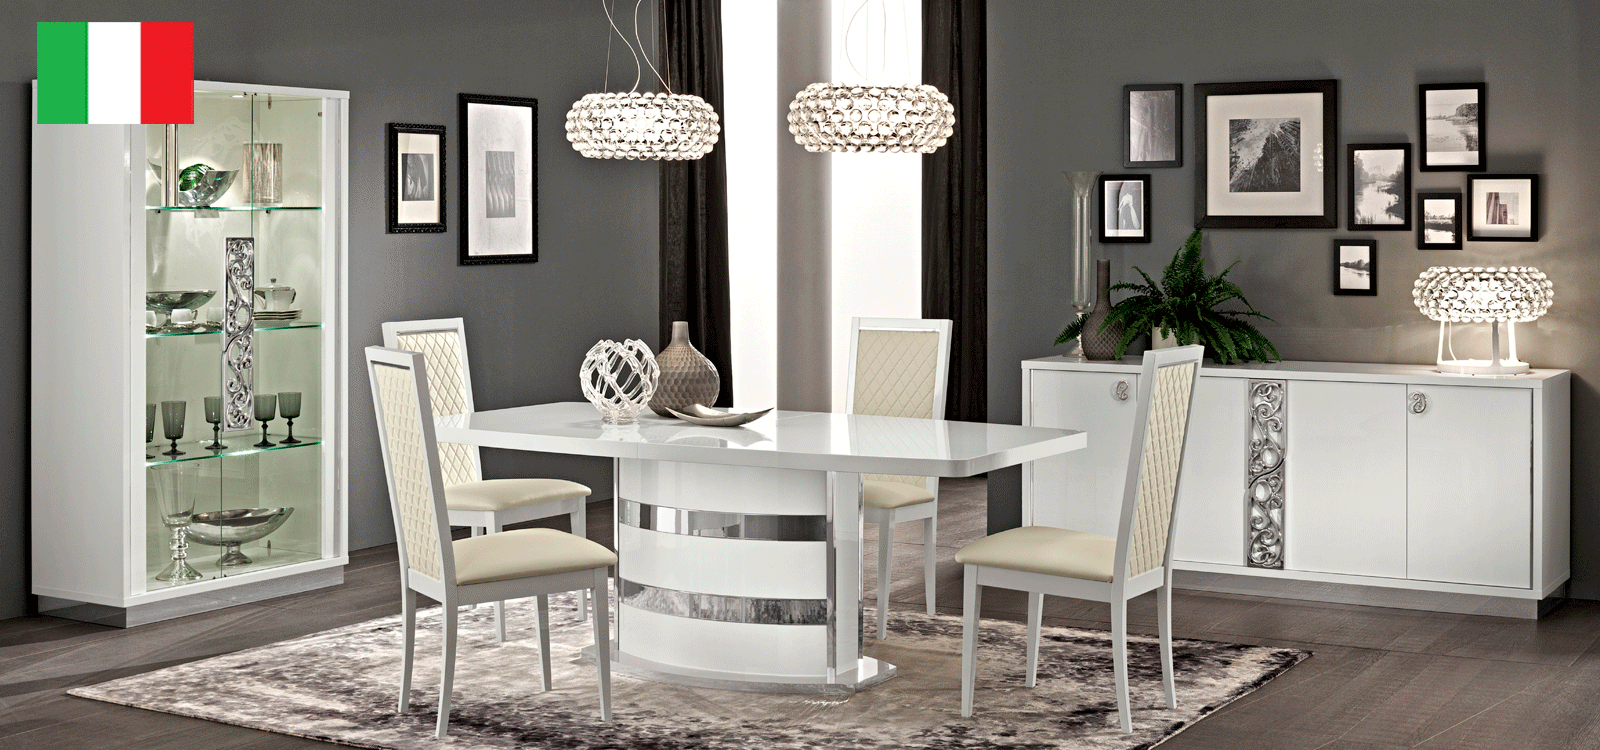 Dining Room Furniture Marble-Look Tables Roma Dining White, Italy